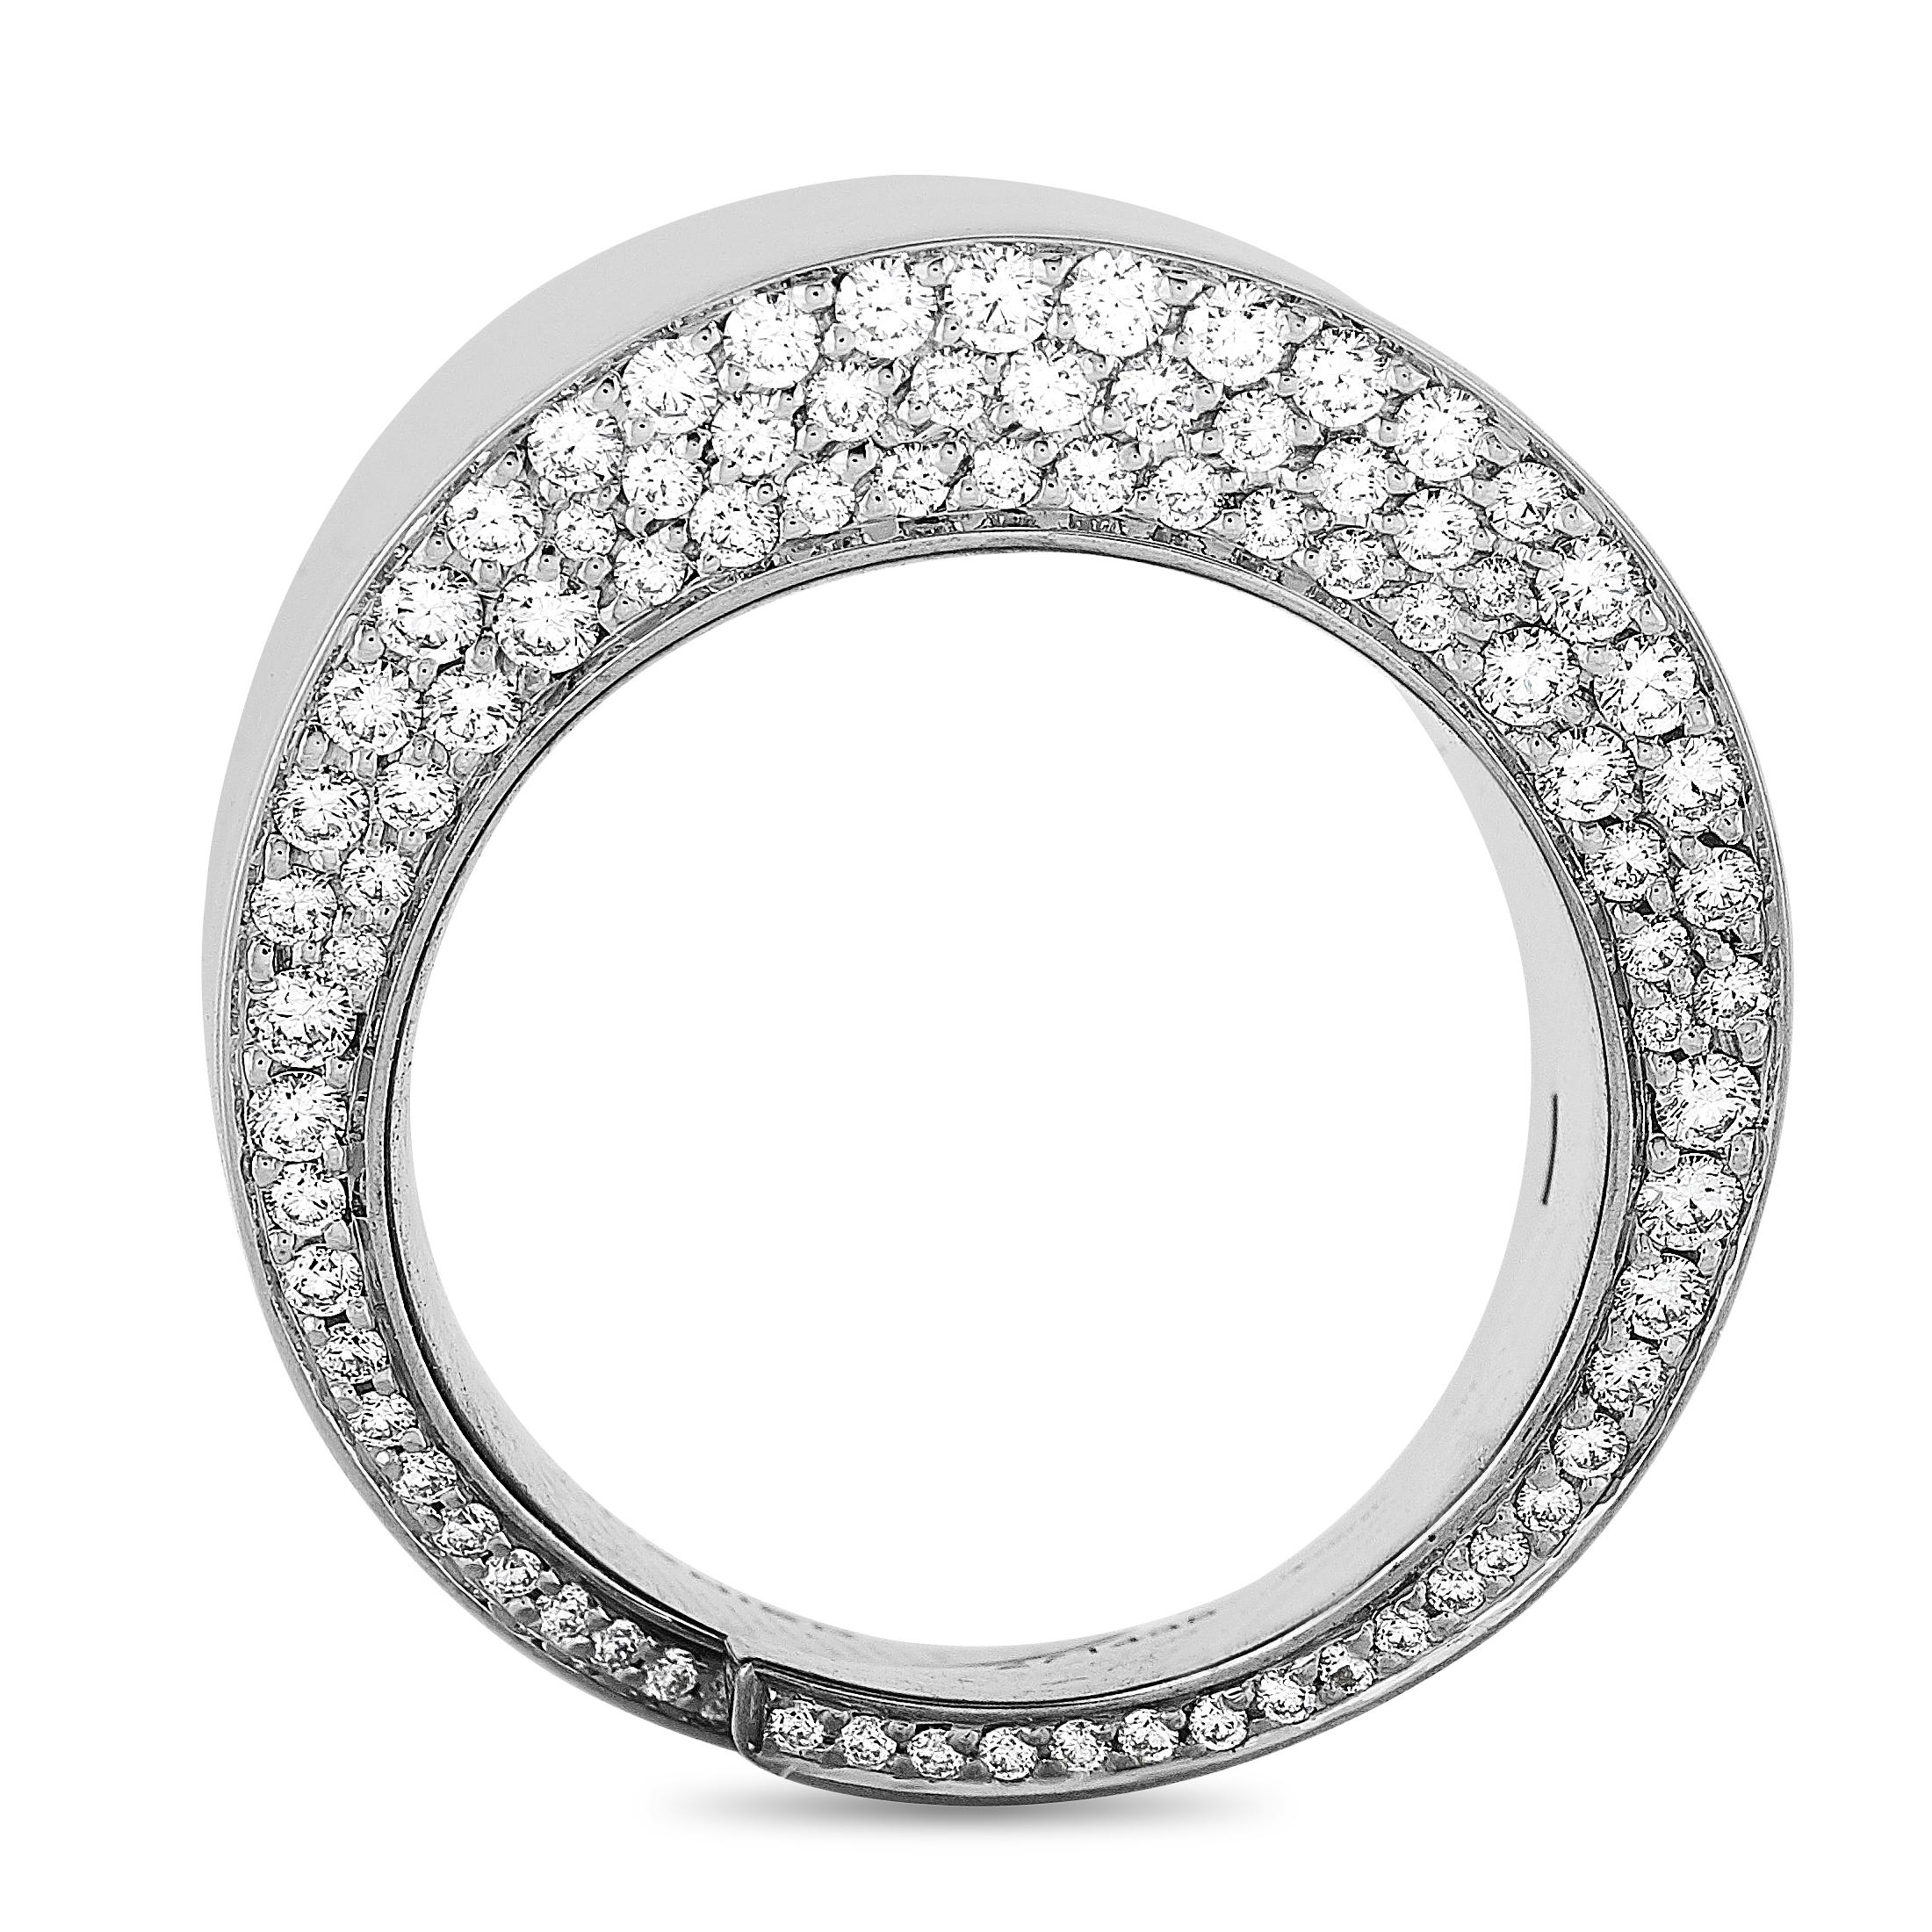 The Vhernier “Vague Grande” ring is crafted from 18K white gold and weighs 30.5 grams, boasting band thickness of 8 mm and top height of 5 mm. The ring is set with diamonds that amount to 1.78 carats.
Ring Size: 7.5

This item is offered in brand